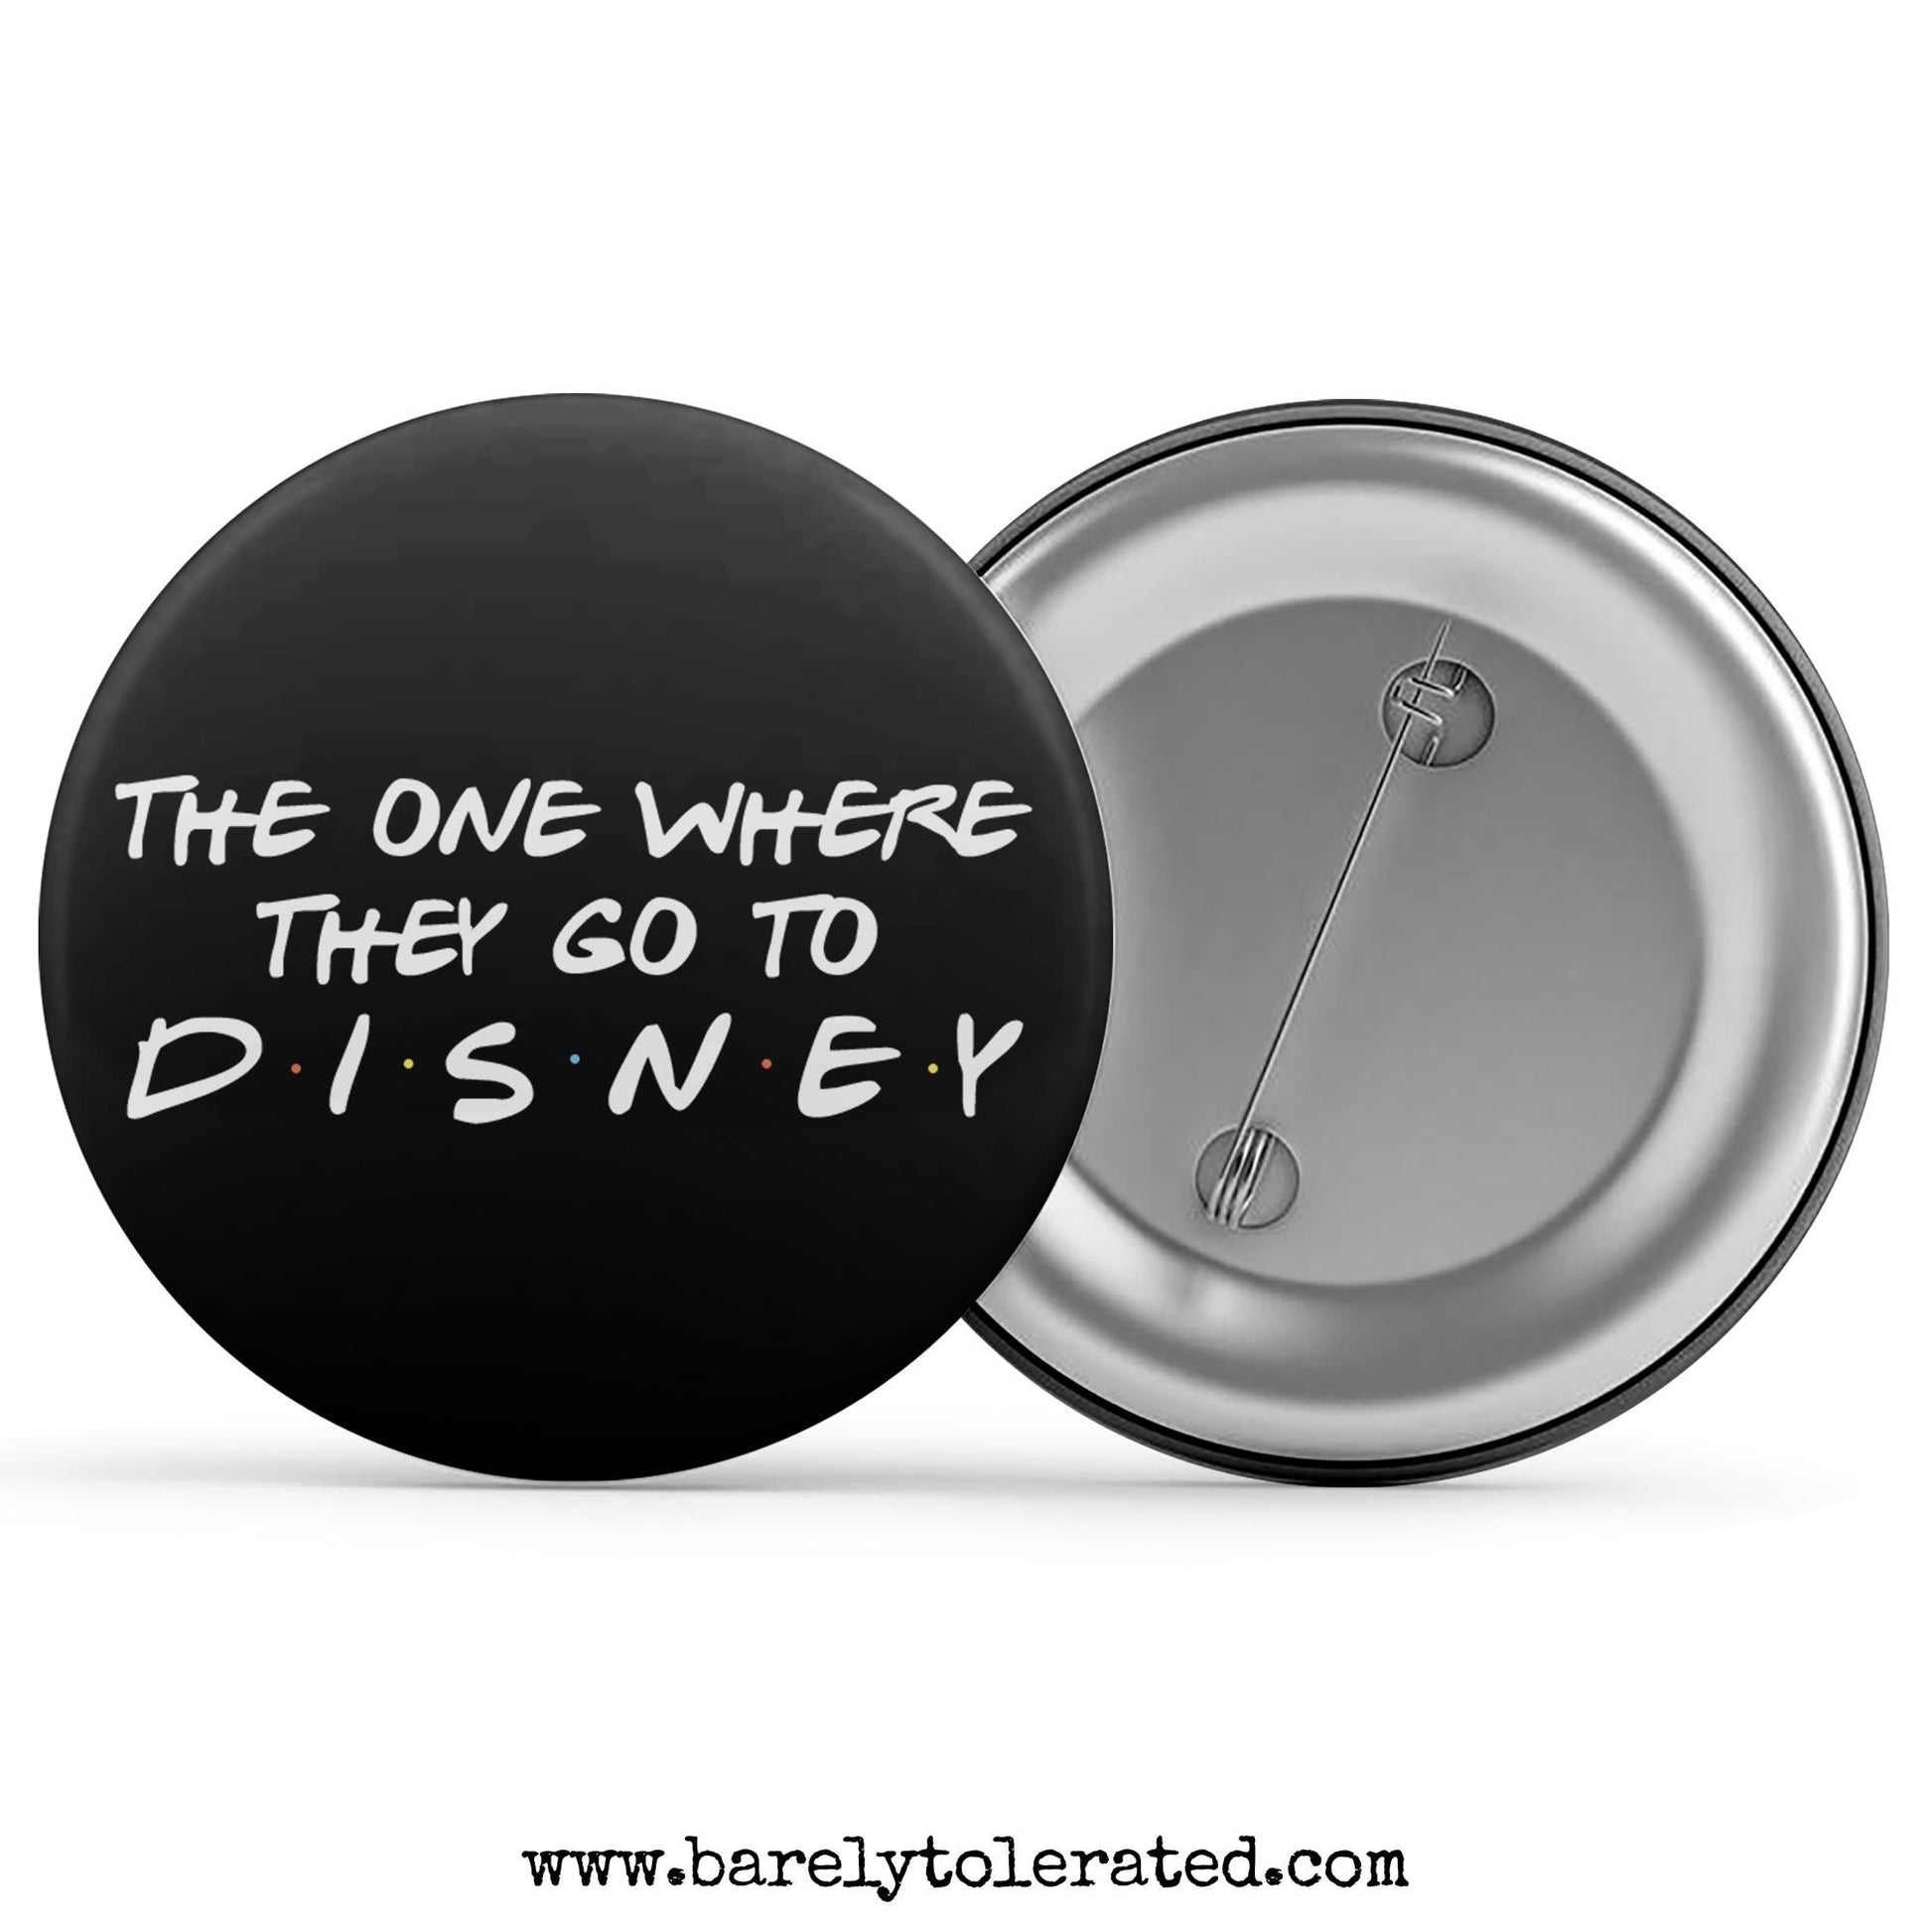 The One Where They Go To Disney Image